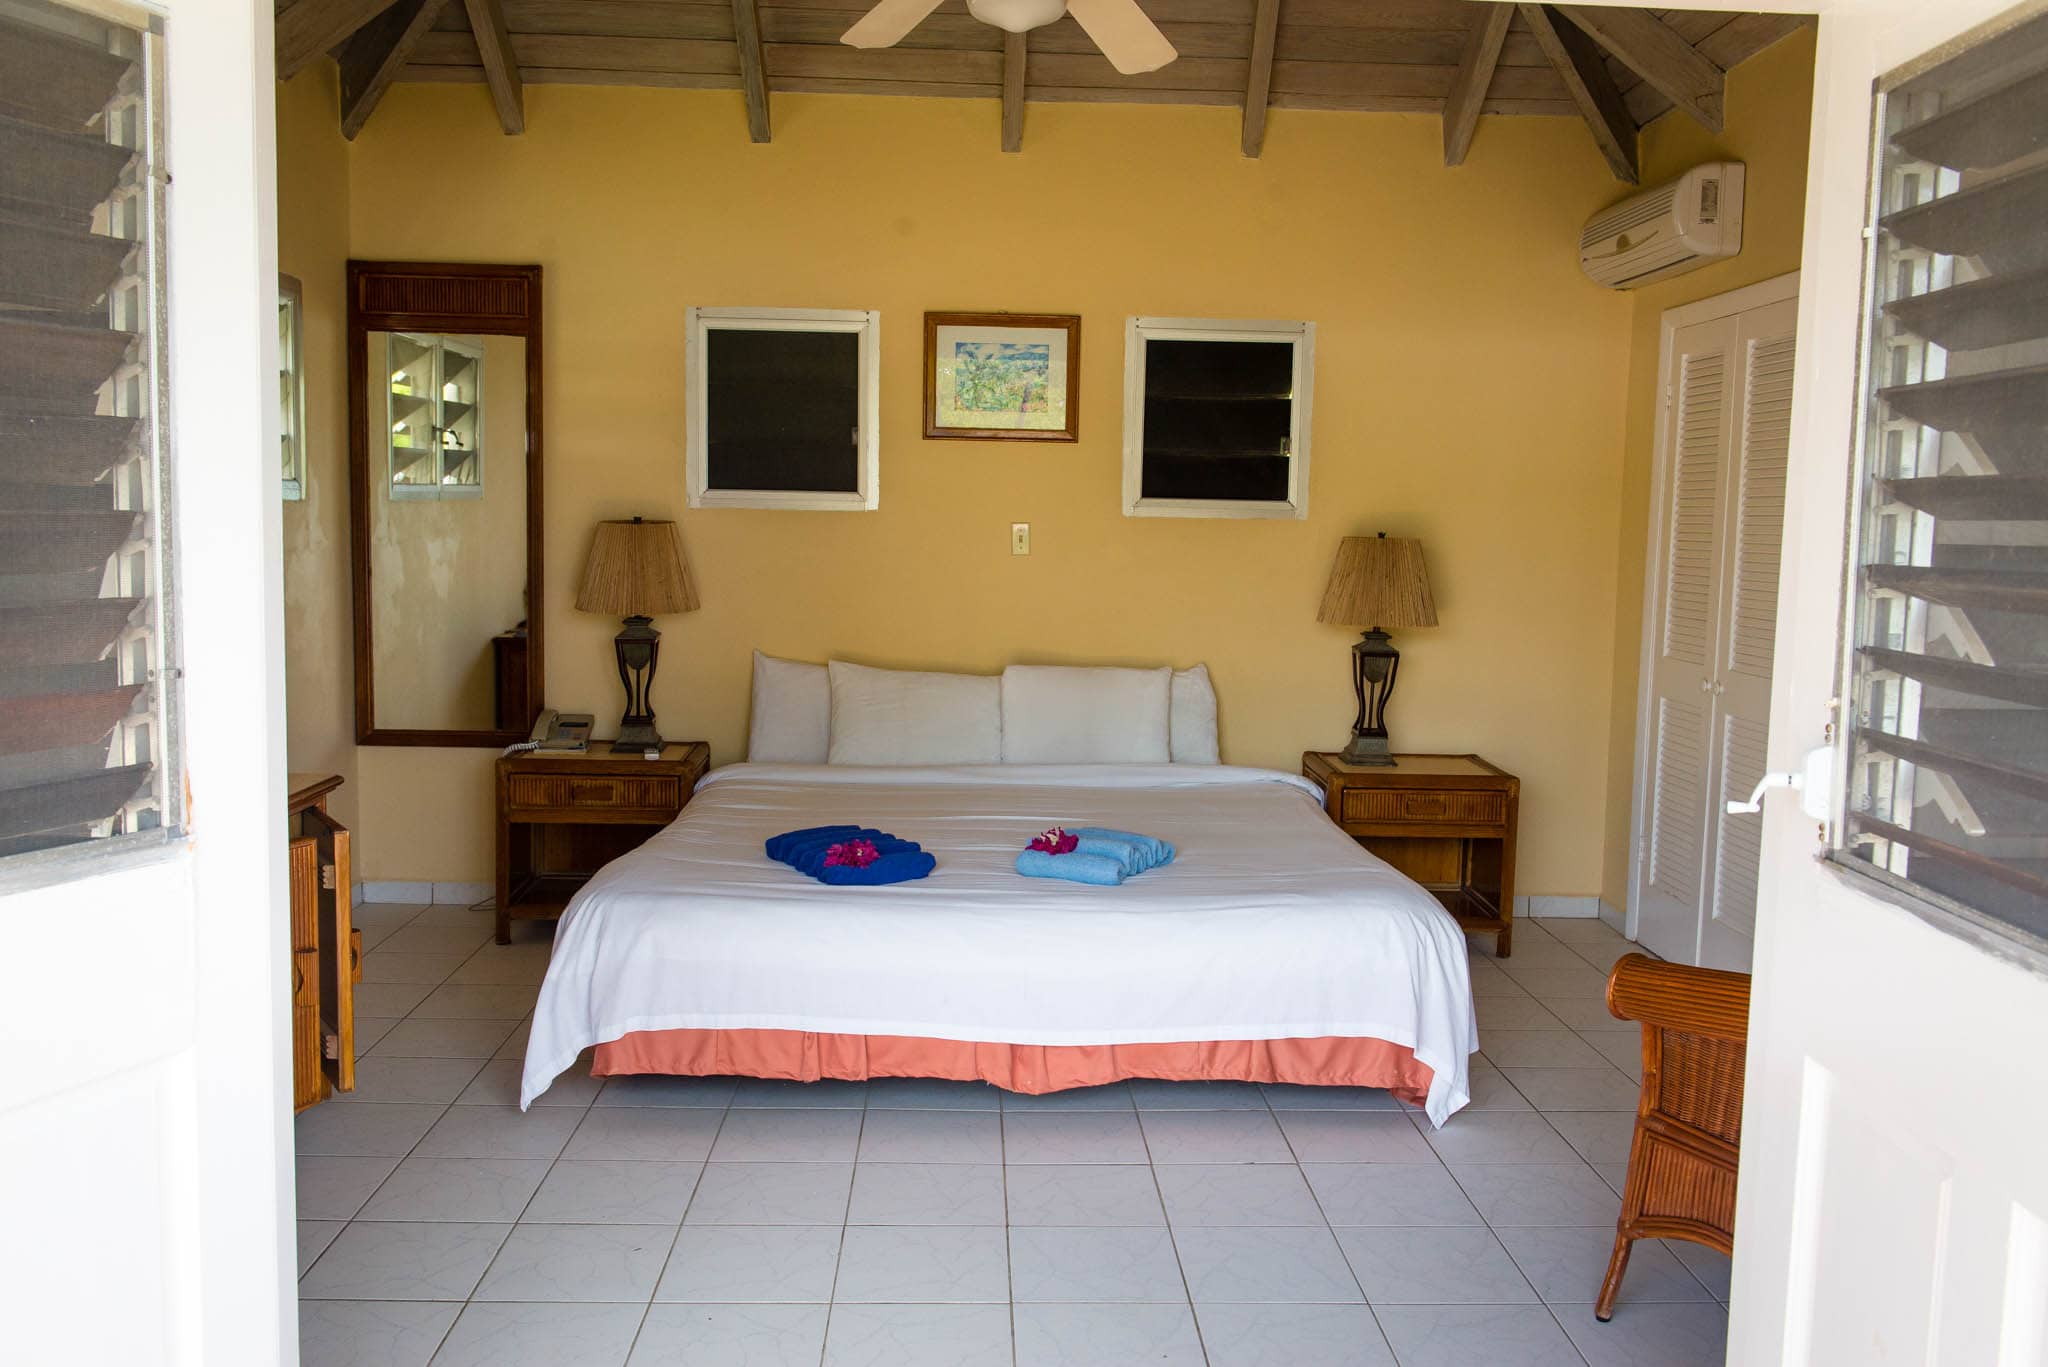 Quaint and comfortable rooms give you that real island feel.